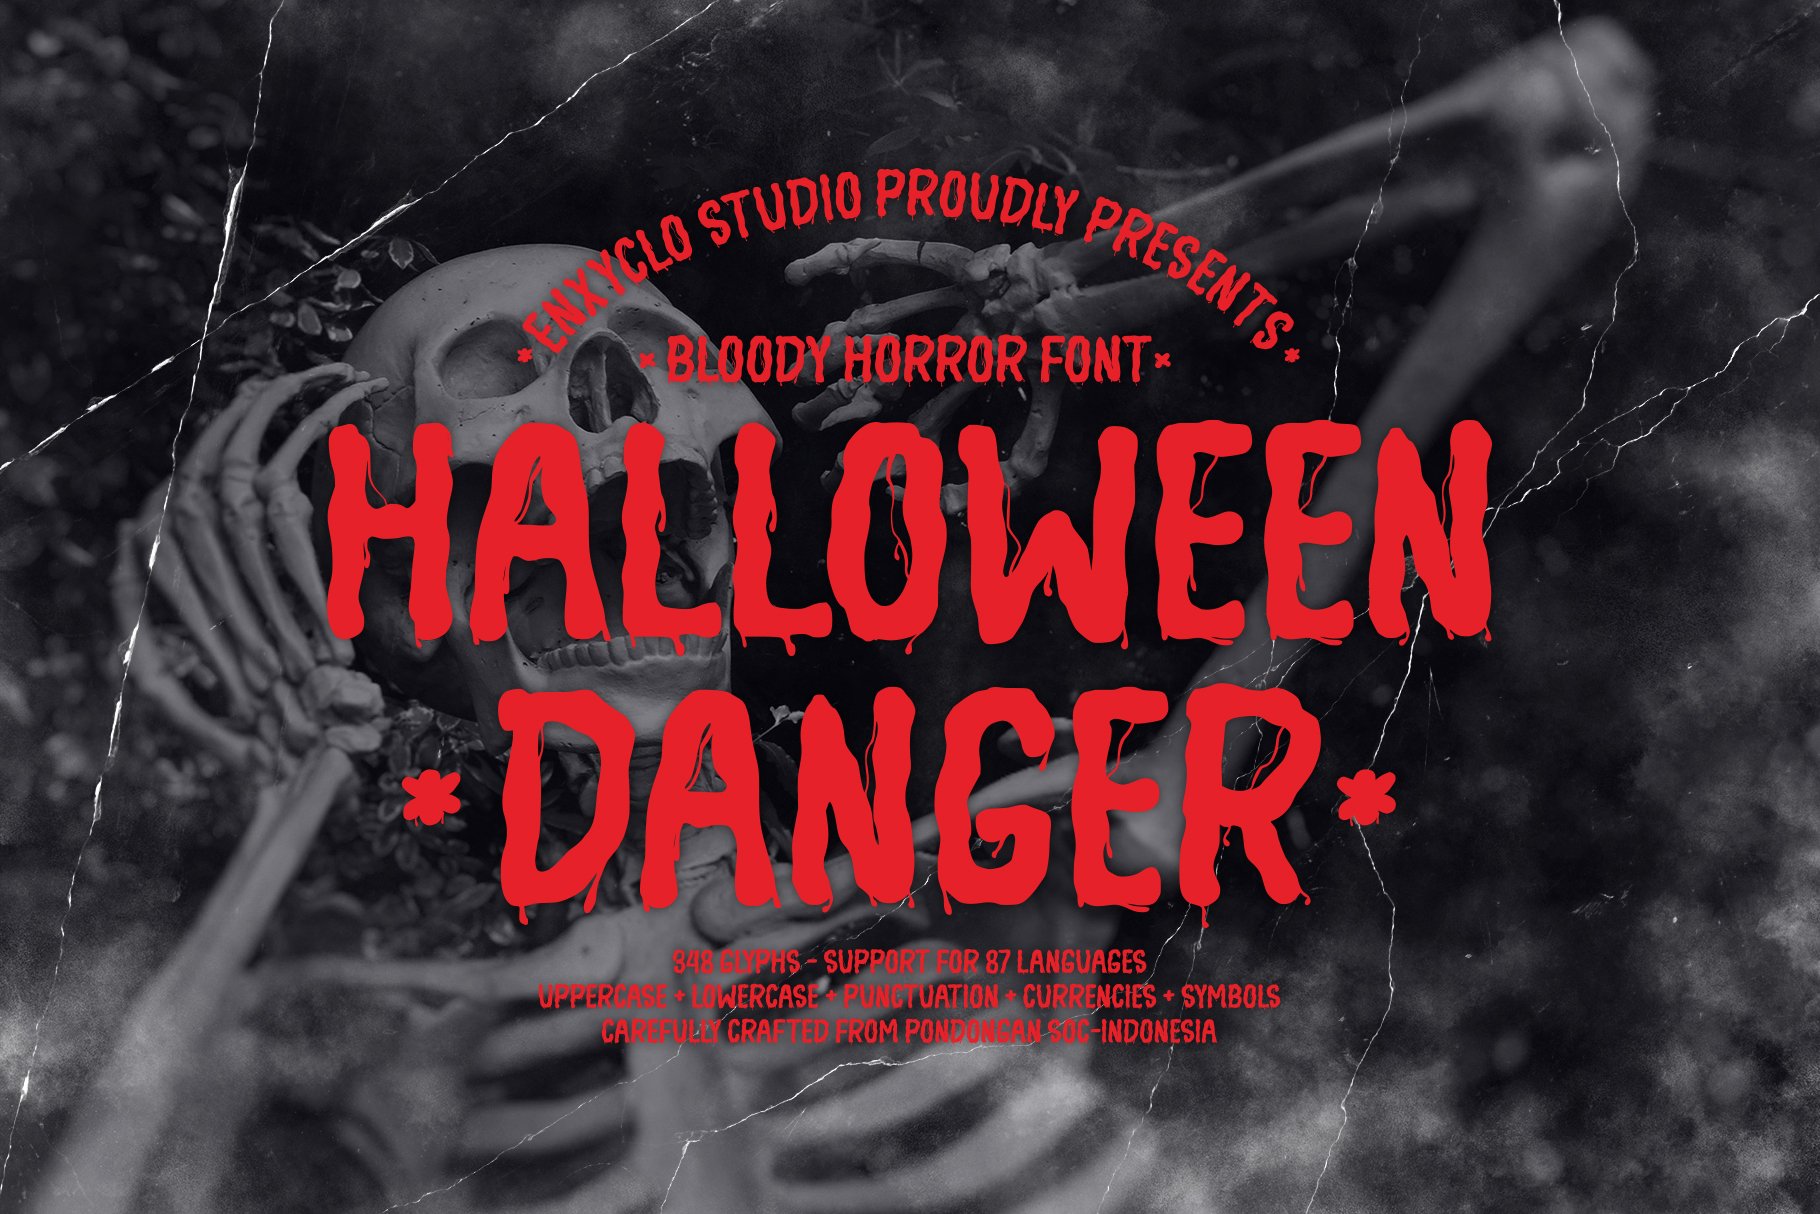 NCL HALLOWEEN DANGER - Bloody Horror cover image.